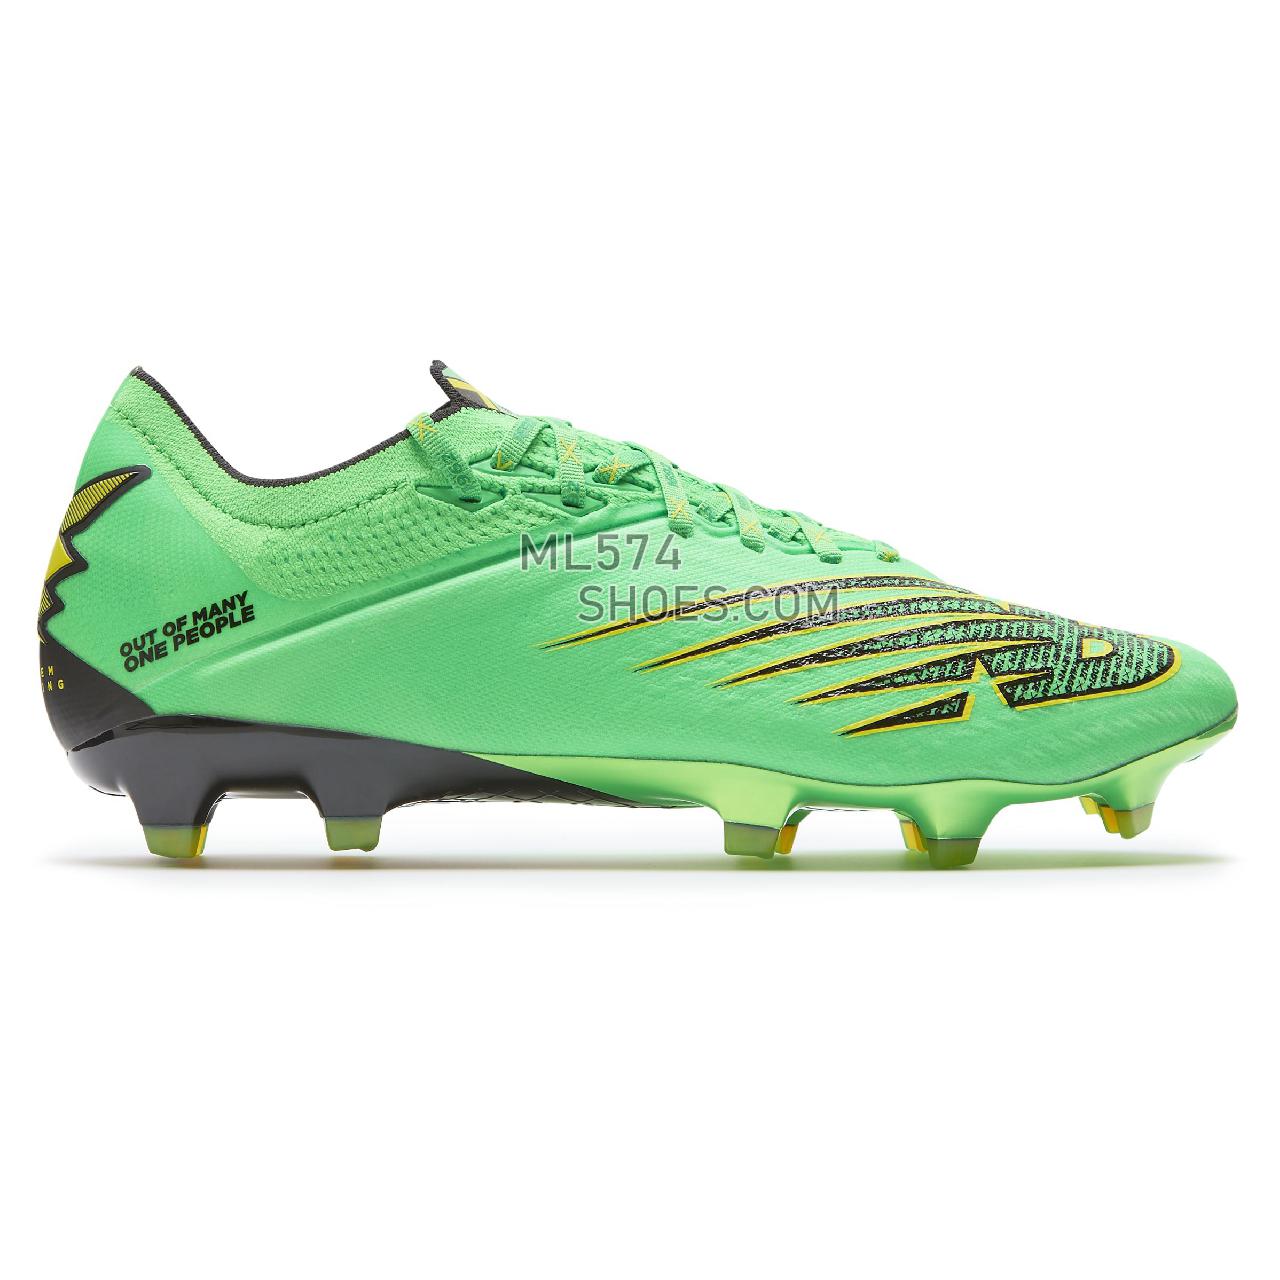 New Balance Furon V6+ Pro FG - Men's Soccer - Acidic Green with Citra Yellow and Black - MSF1F106